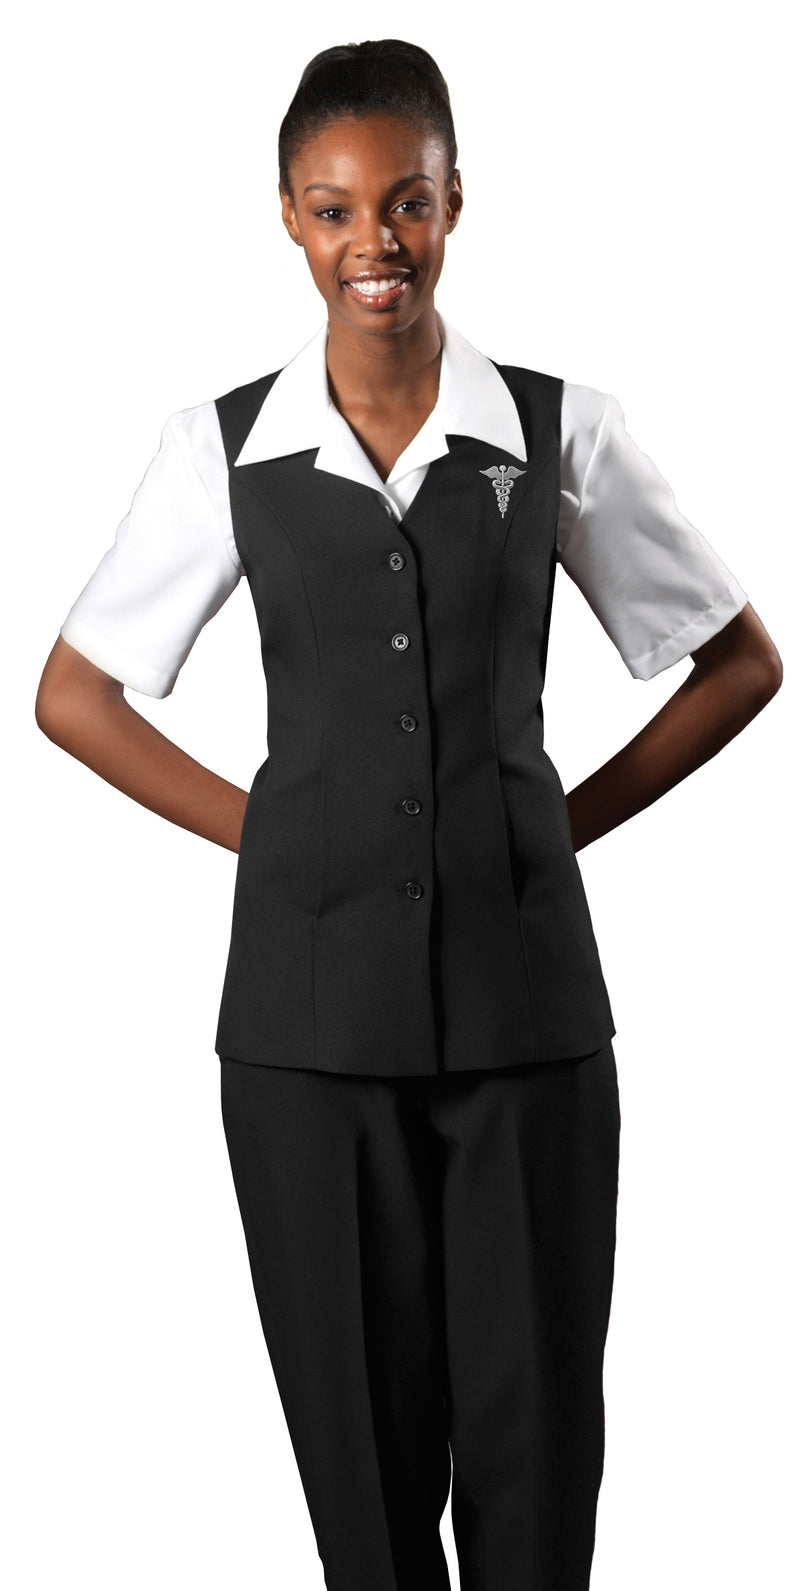 Edwards Garment [7270] Essential Polyester Tunic. Live Chat For Bulk Discounts.